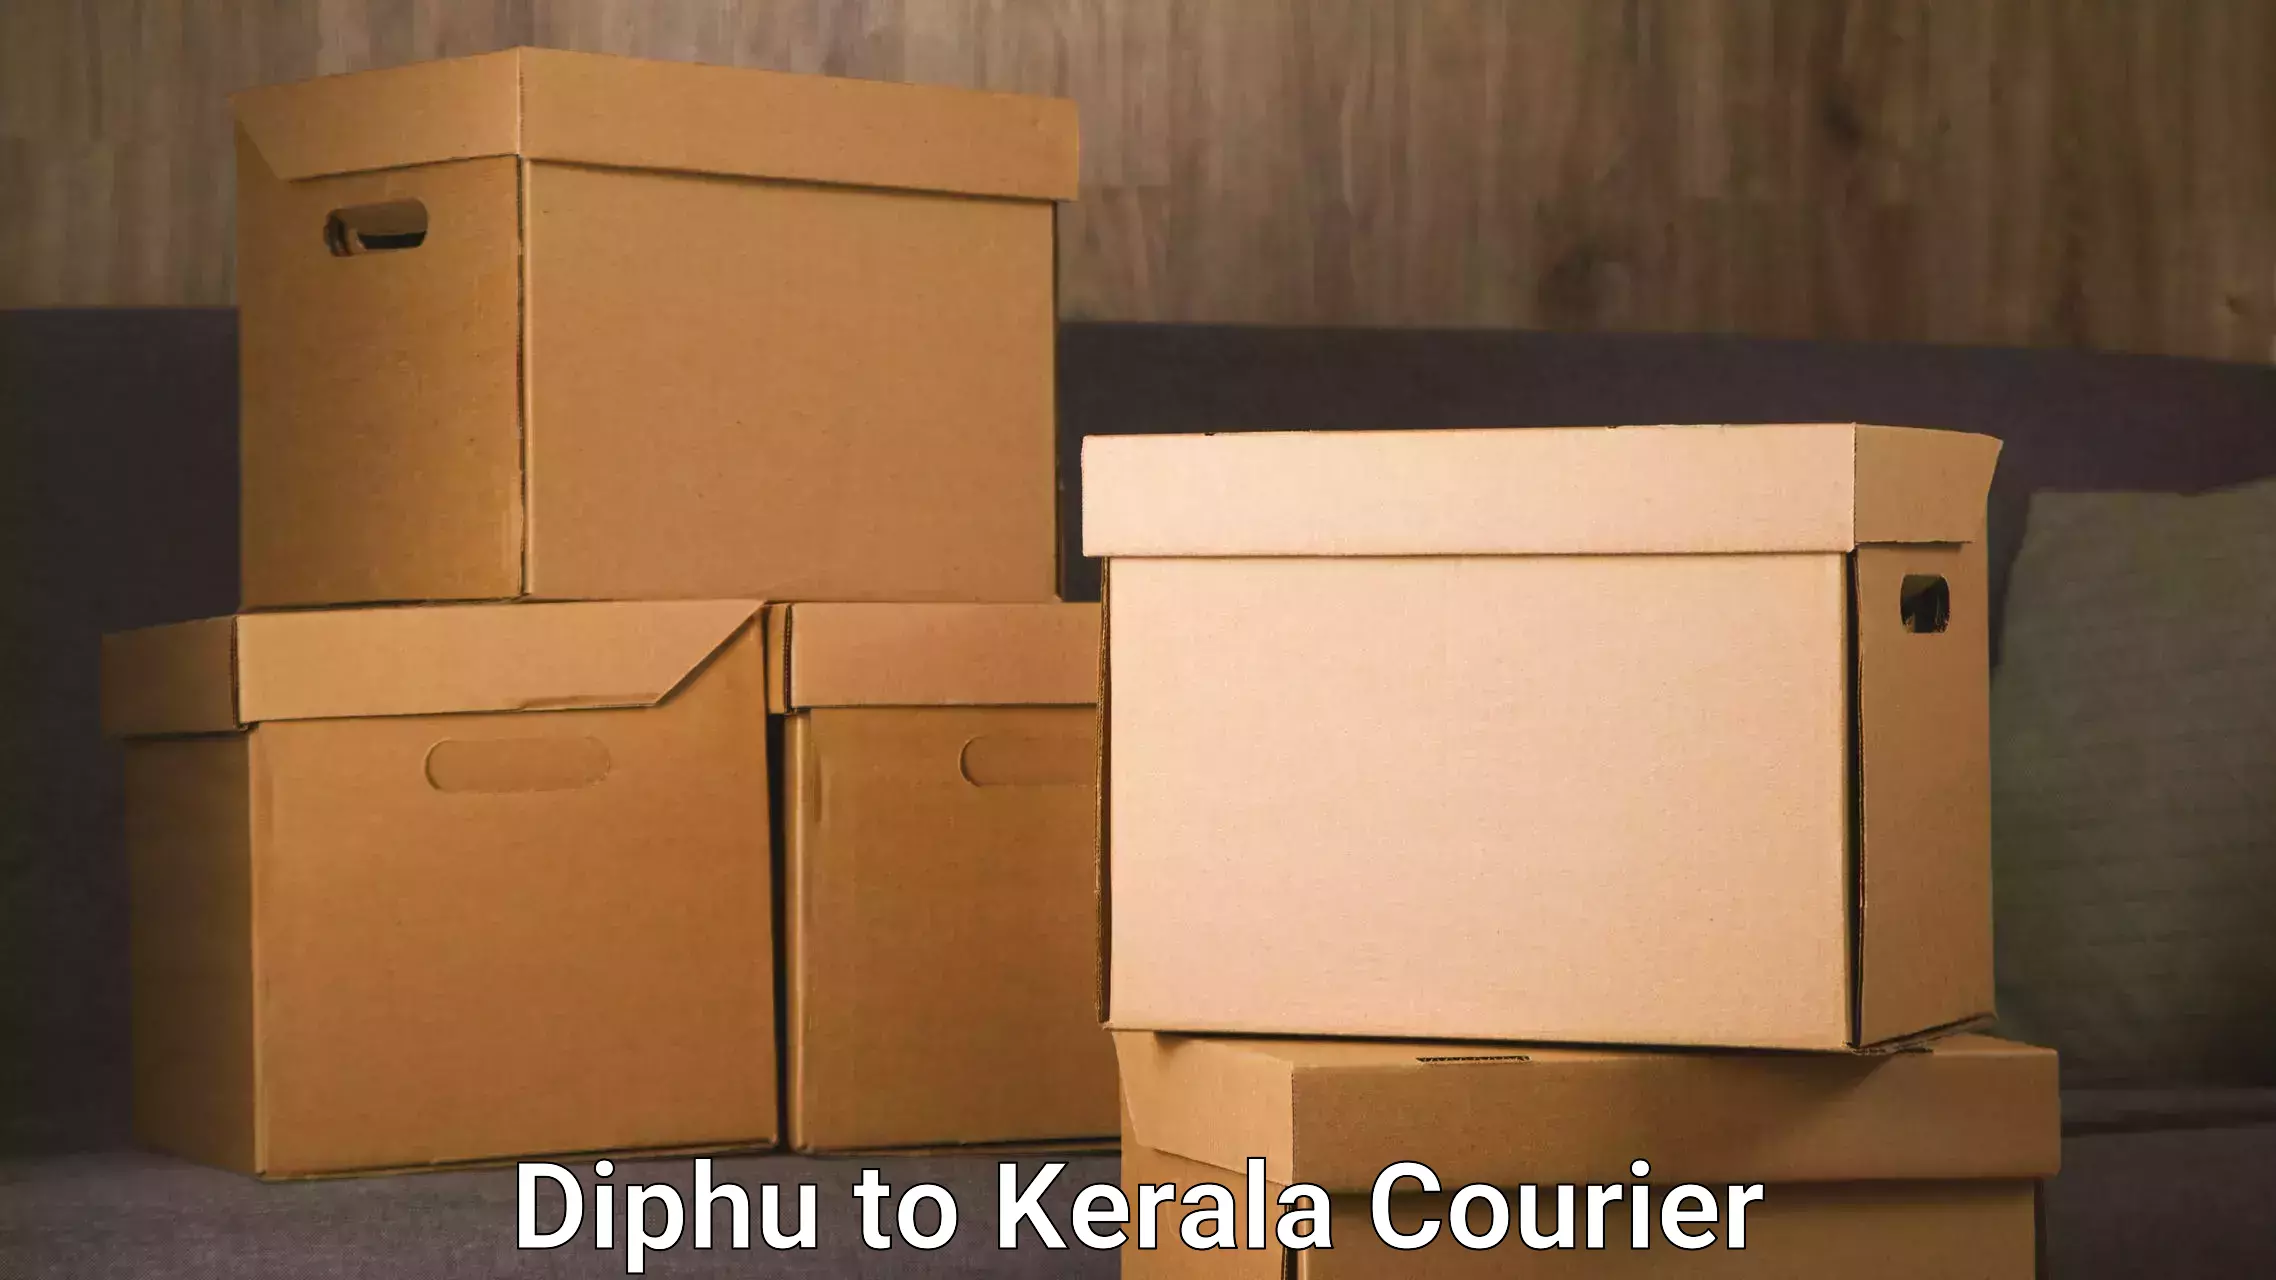 Express package services Diphu to Cochin Port Kochi